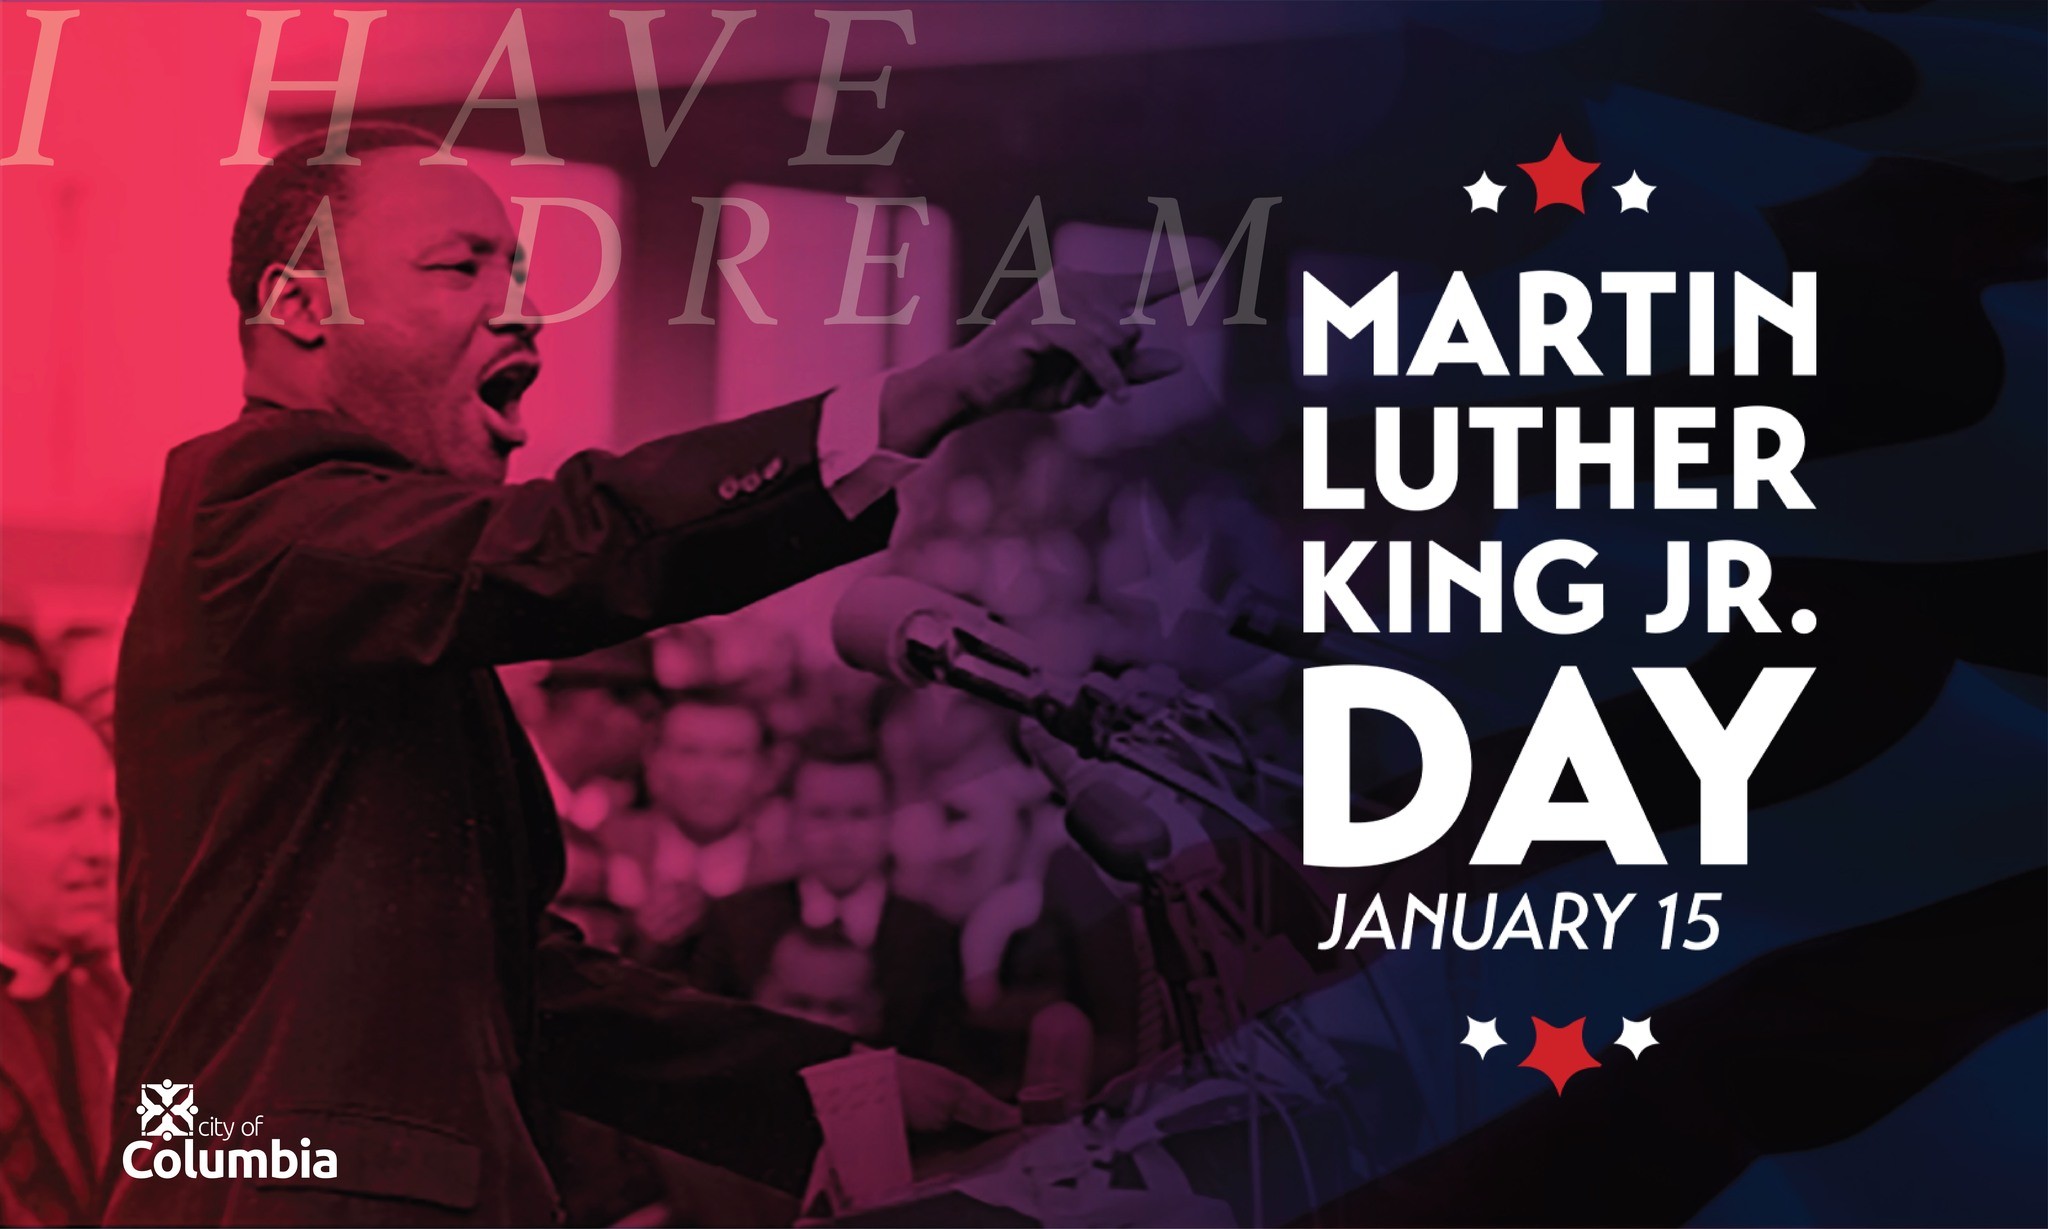 City of Columbia offices closed Jan. 15 in observance of Martin Luther